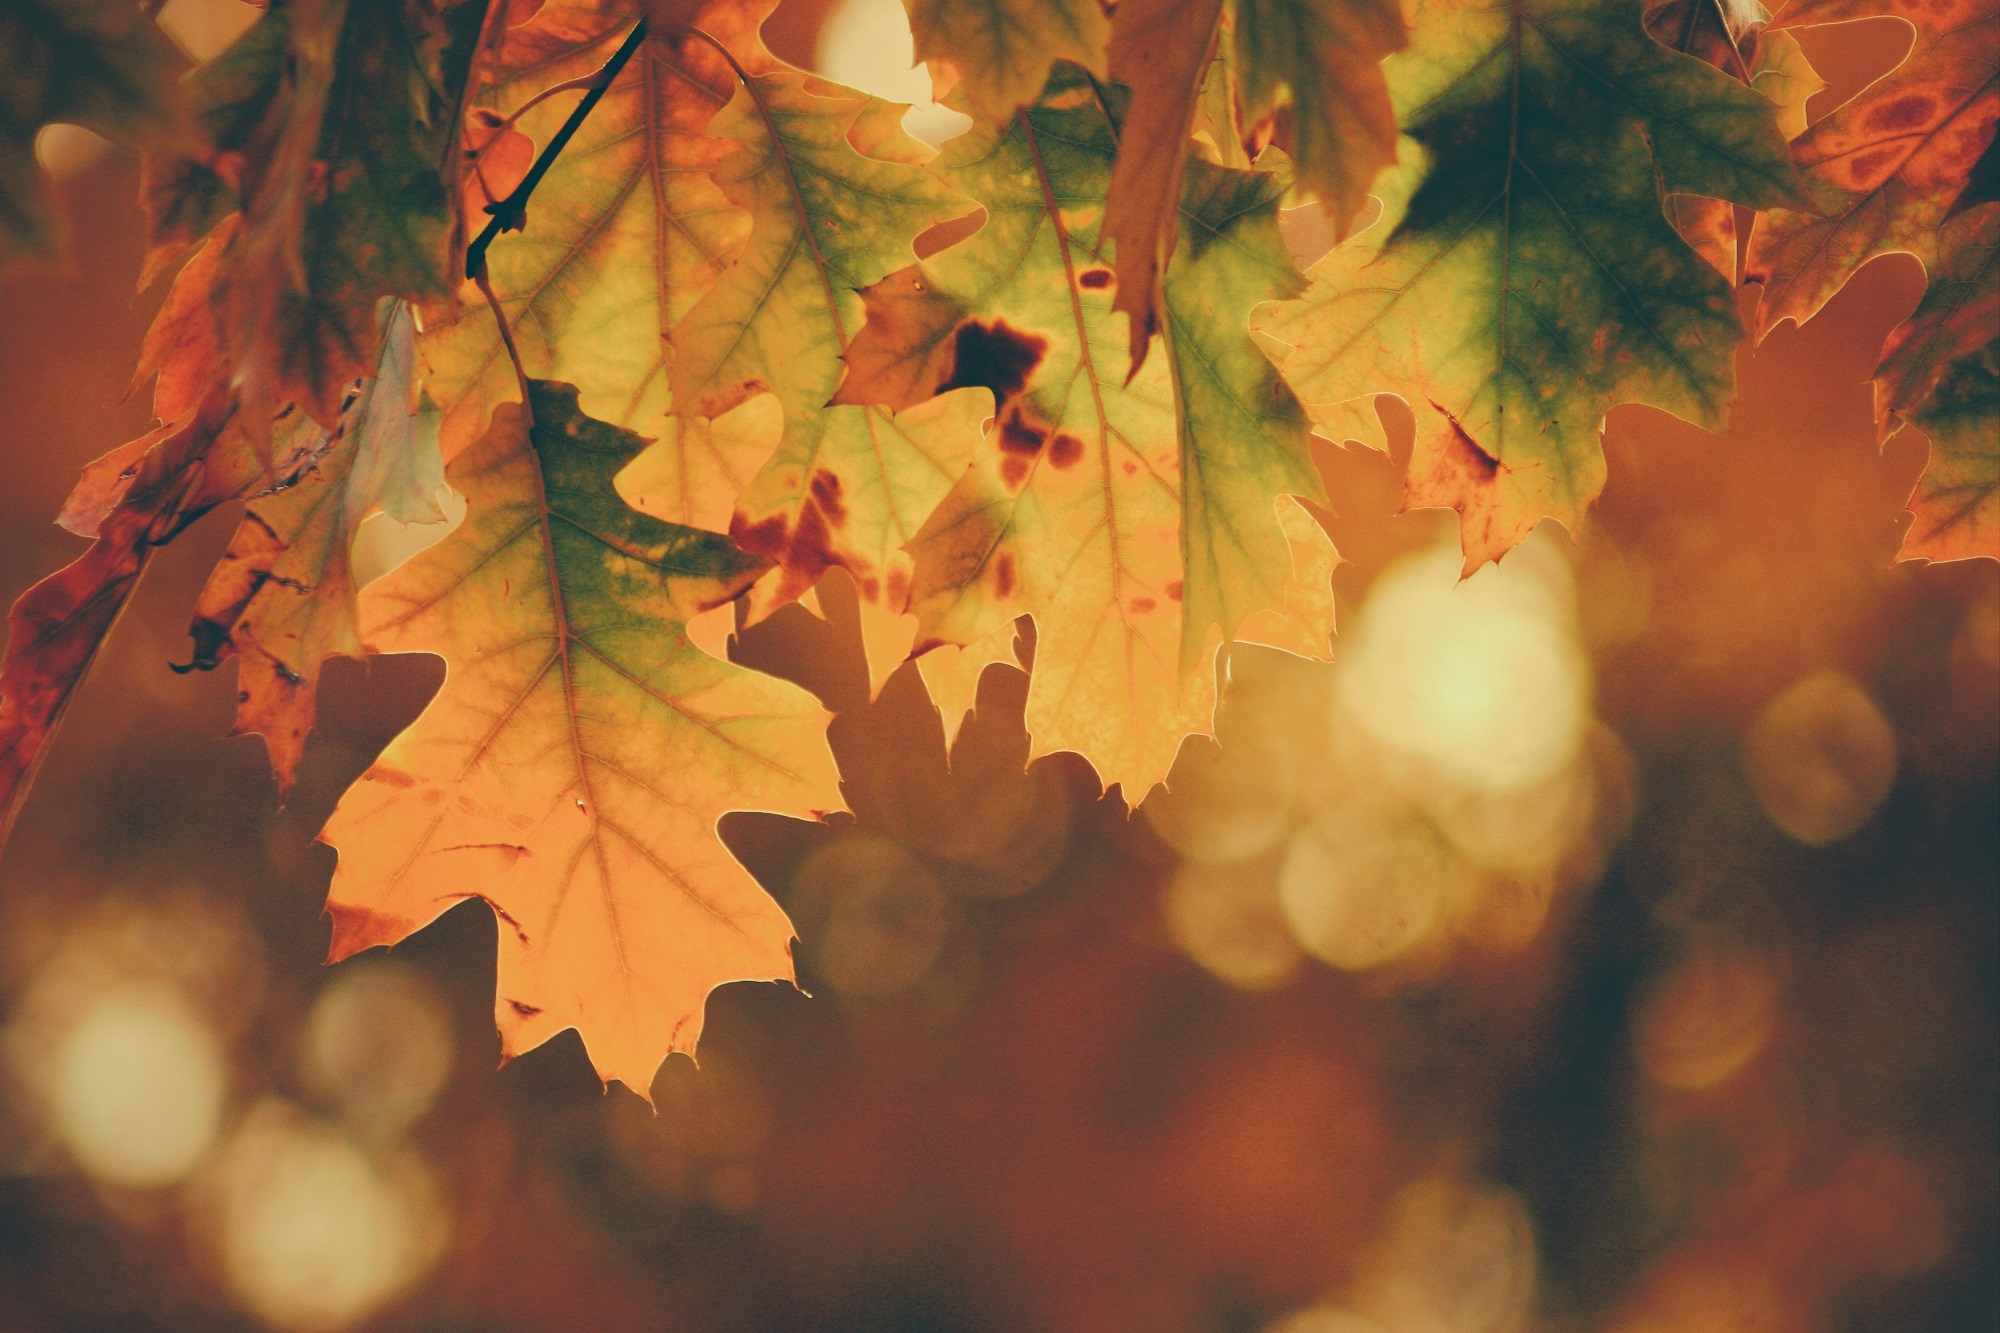 10 Color Palettes (and HEX Codes) Perfect for the Autumn/Fall Season